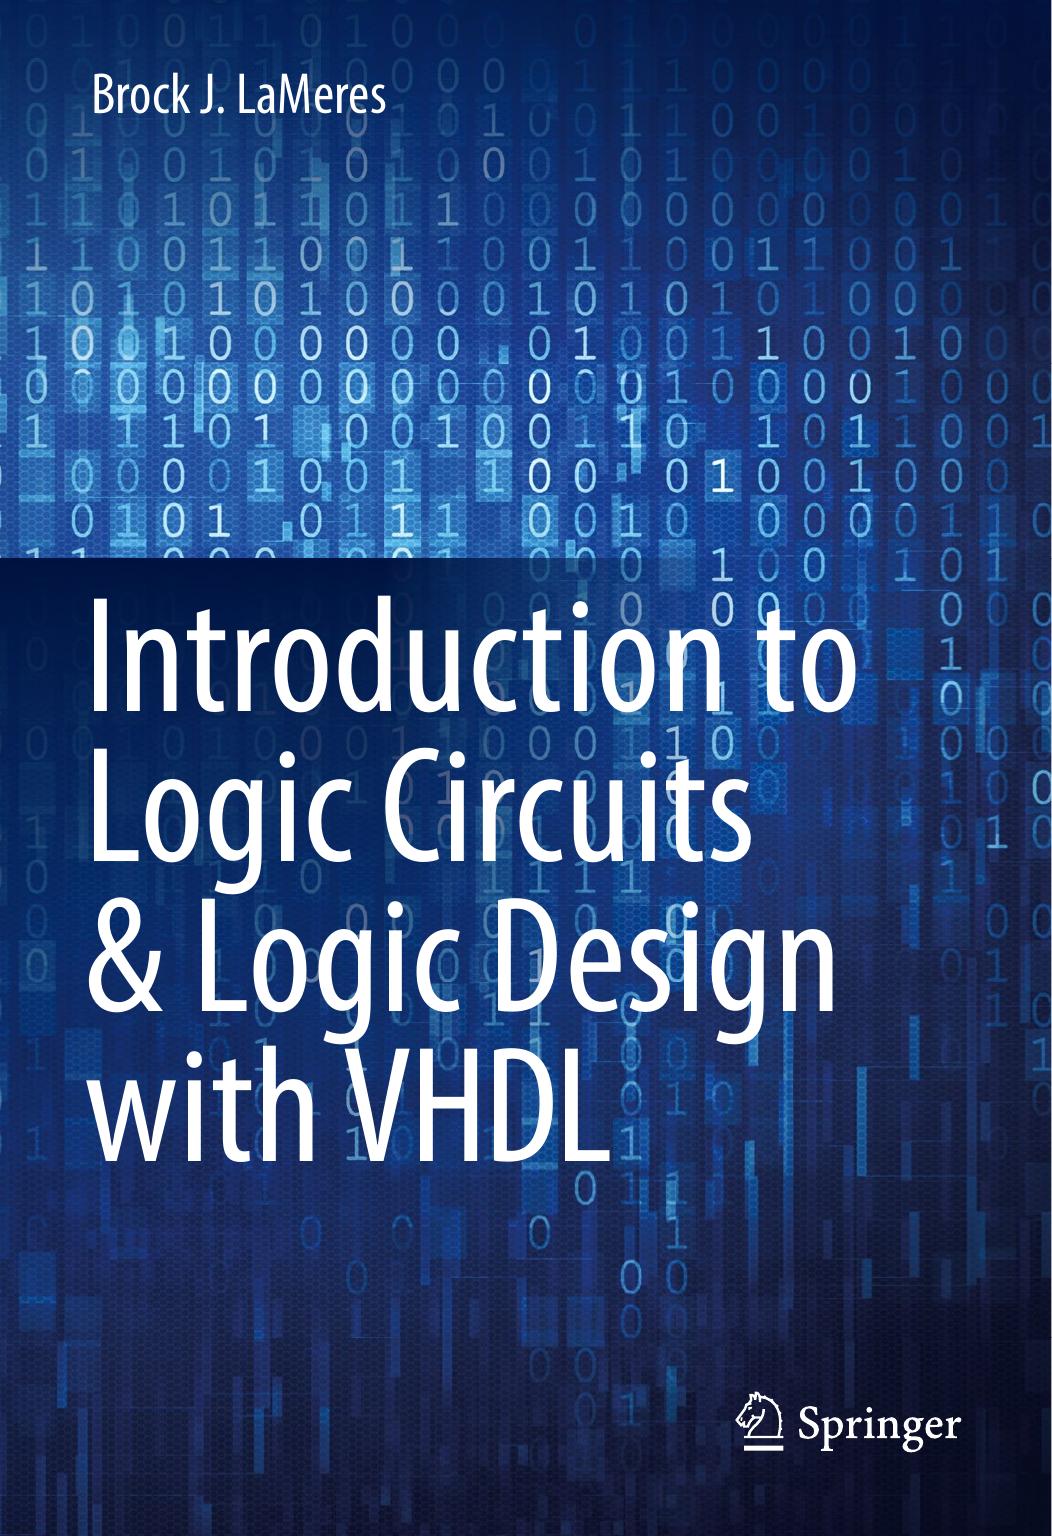 Introduction to Logic Circuits &amp; Logic Design with VHDL 2017